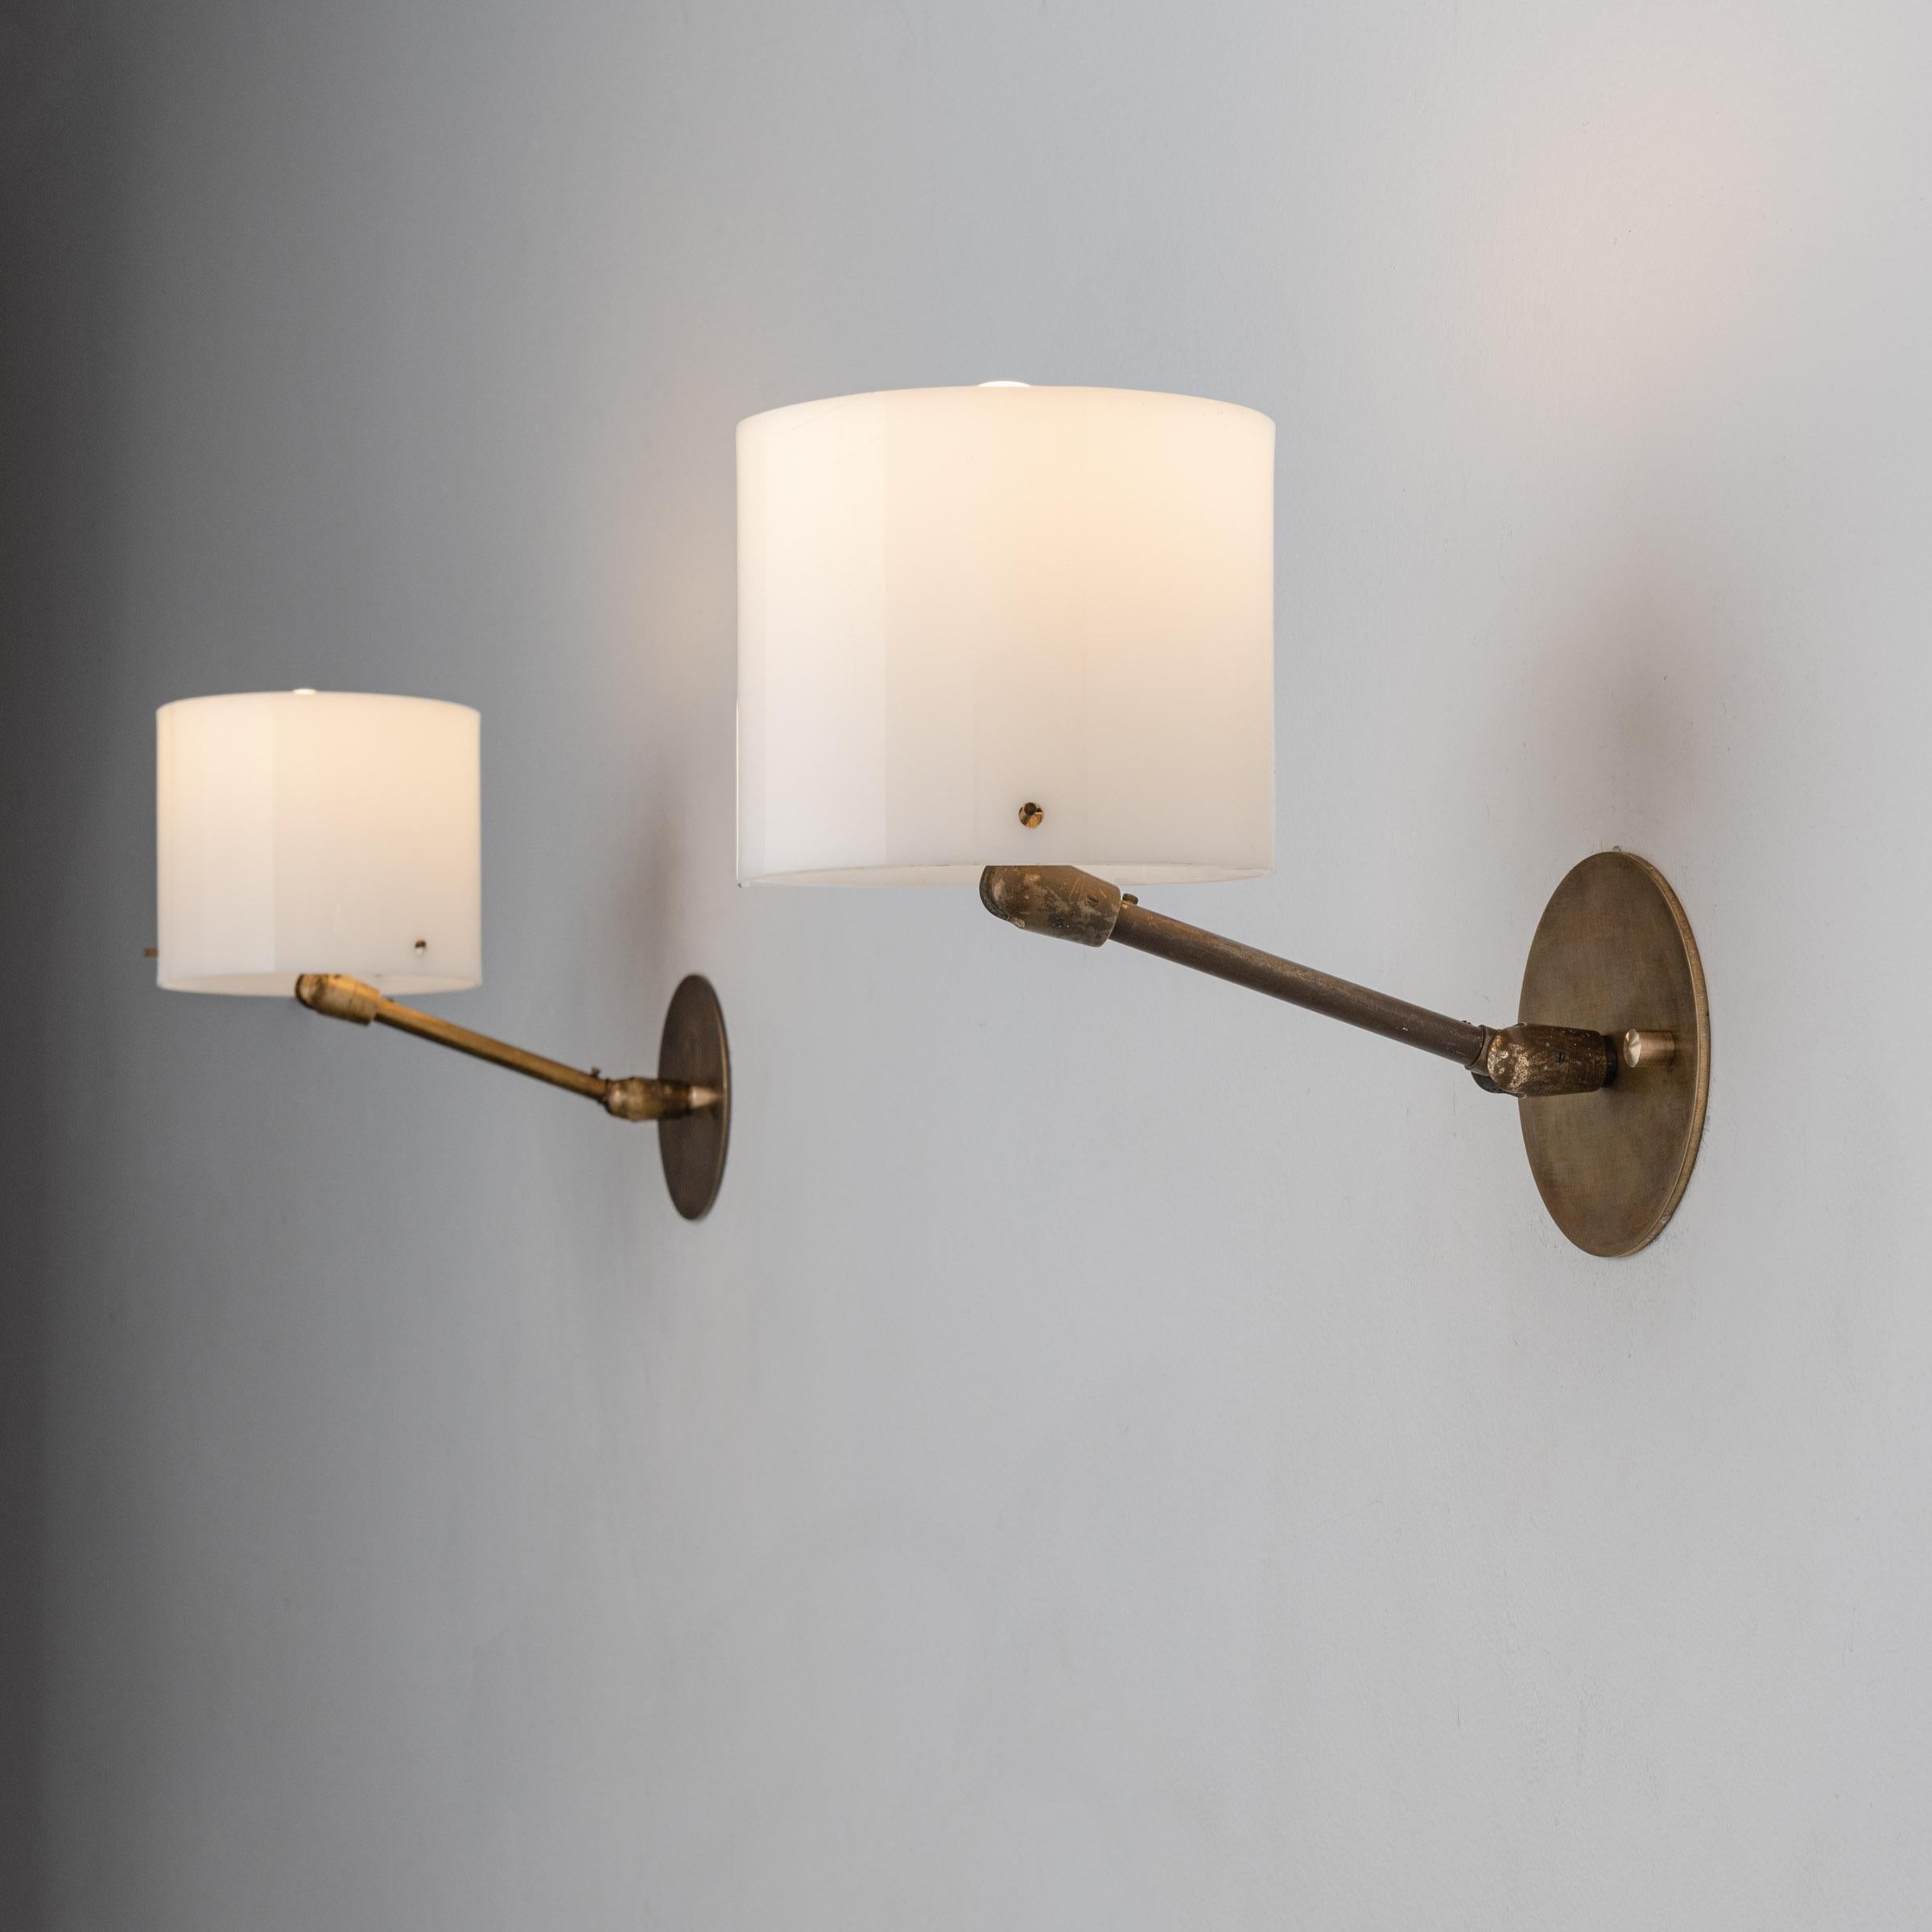 Pair of sconces by Giuseppe Ostuni for Oluce. Designed and manufactured in Italy, circa 1950's. Acrylic, brass, adjustable shade rewired for U.S. standards. Custom brass backplate. We recommend one E14 60w maximum bulb per sconce. Bulbs not included.